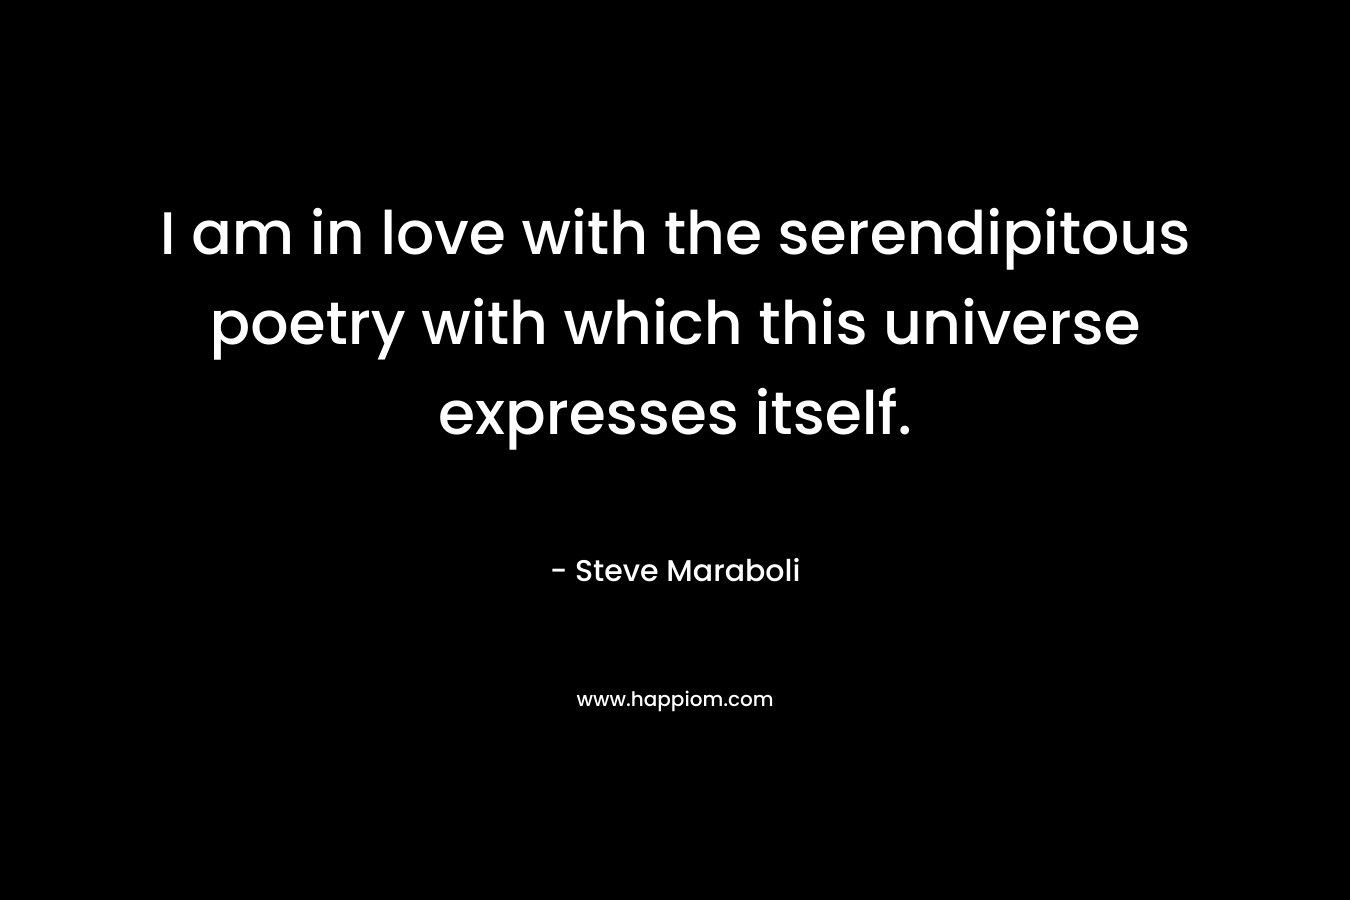 I am in love with the serendipitous poetry with which this universe expresses itself. – Steve Maraboli